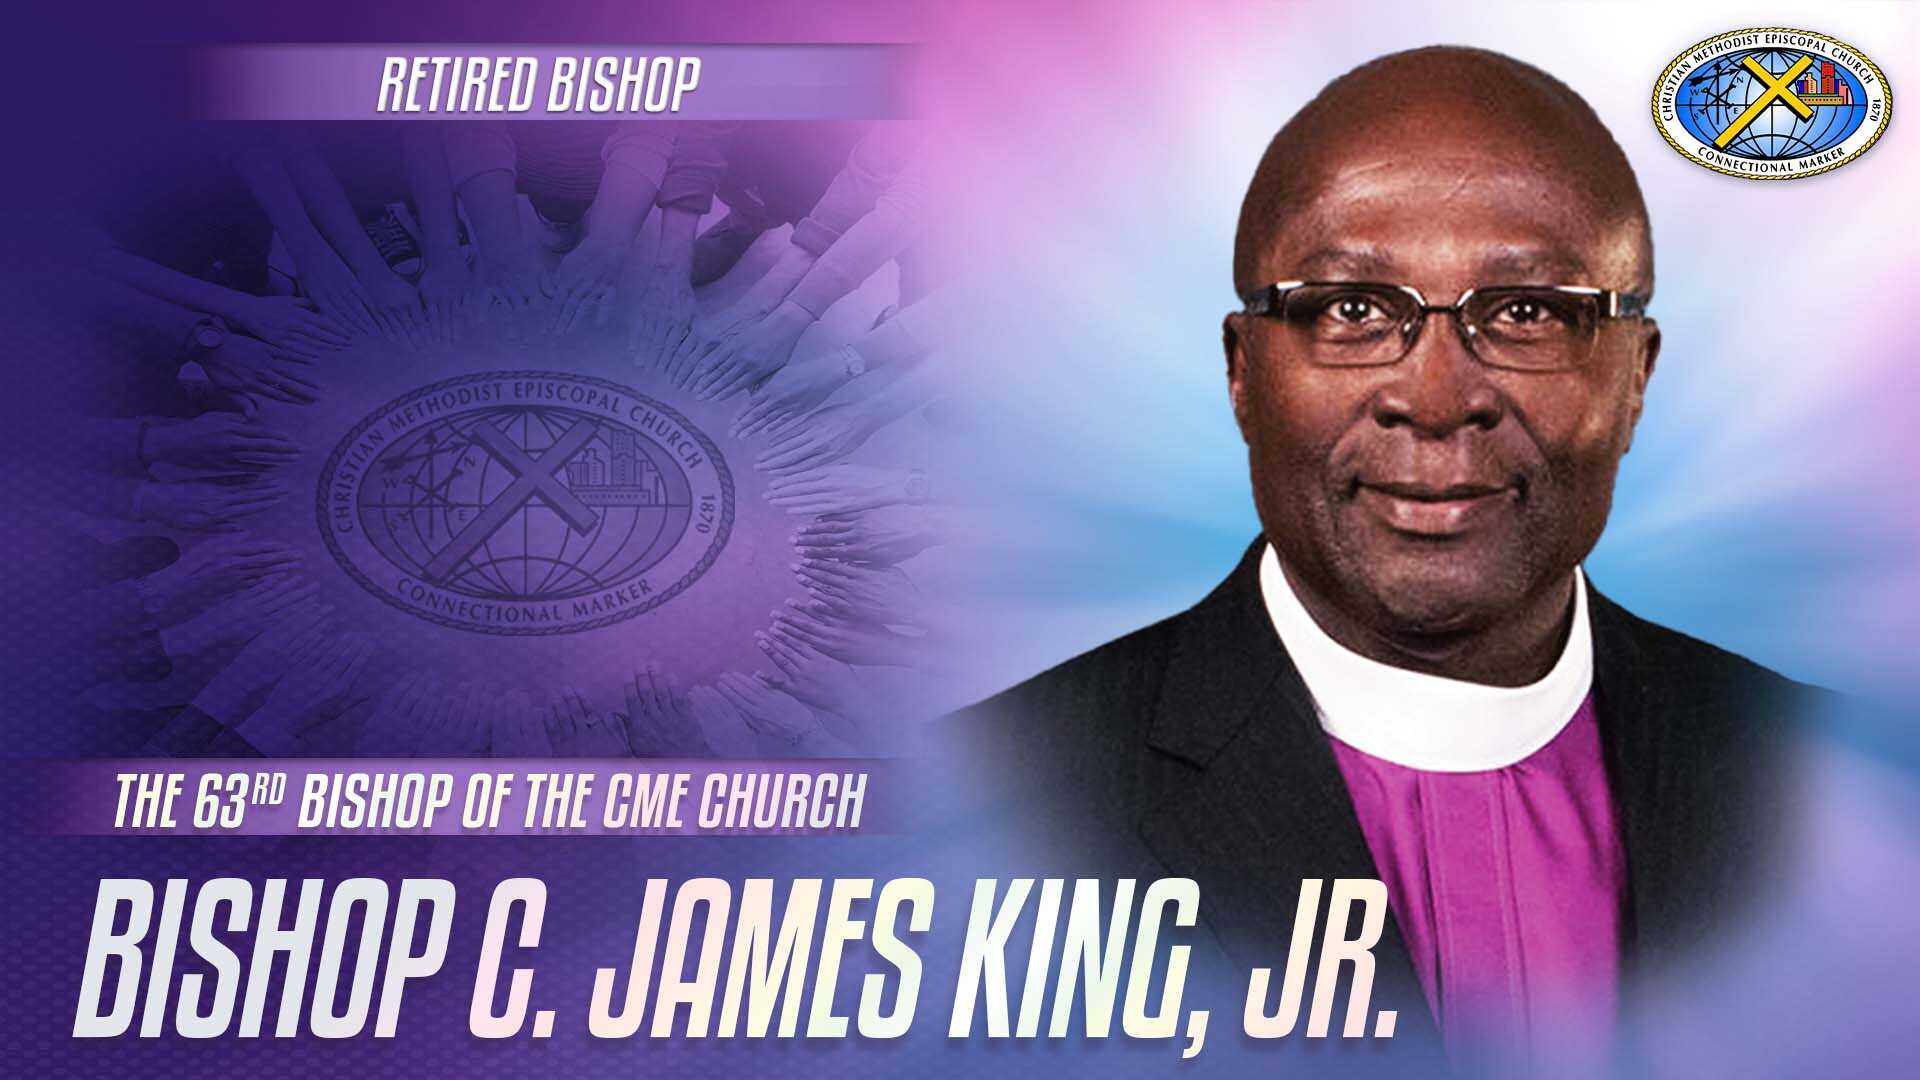 A picture of the rev. Dr. C. James king, jr.